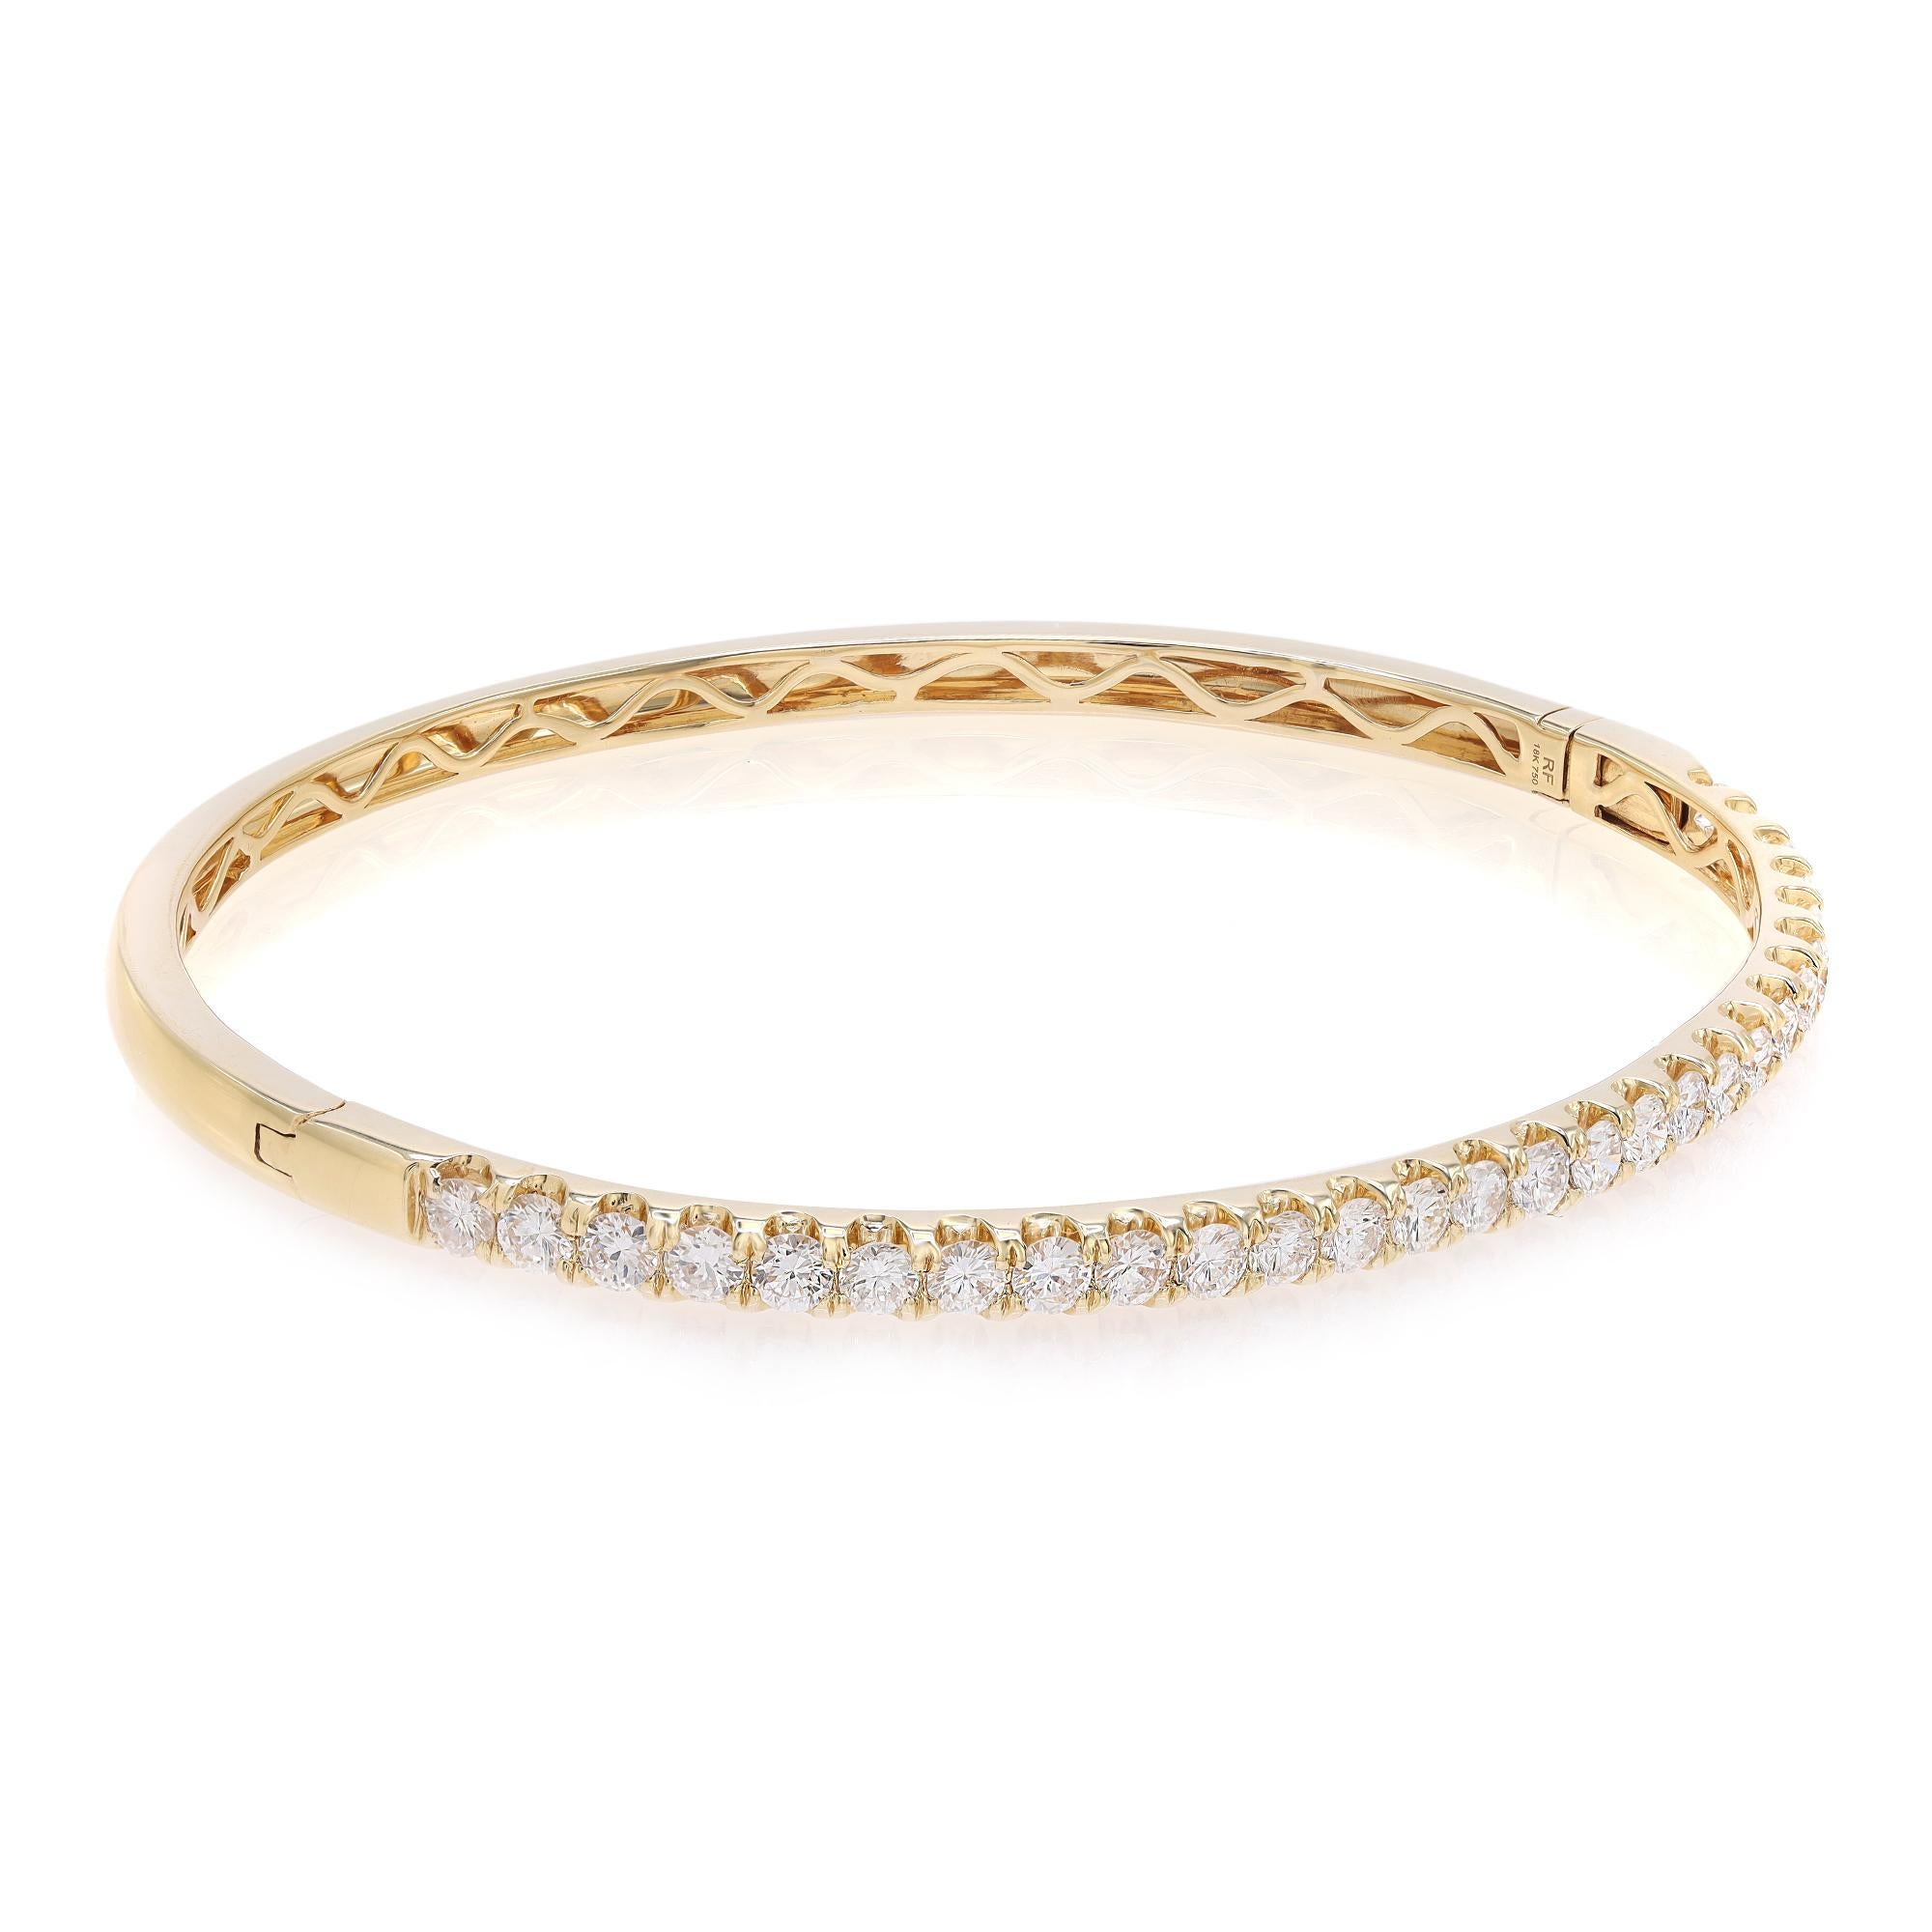 Rachel Koen Round Cut Diamond Bangle Bracelet 18K Yellow Gold 2.00Cttw In New Condition For Sale In New York, NY